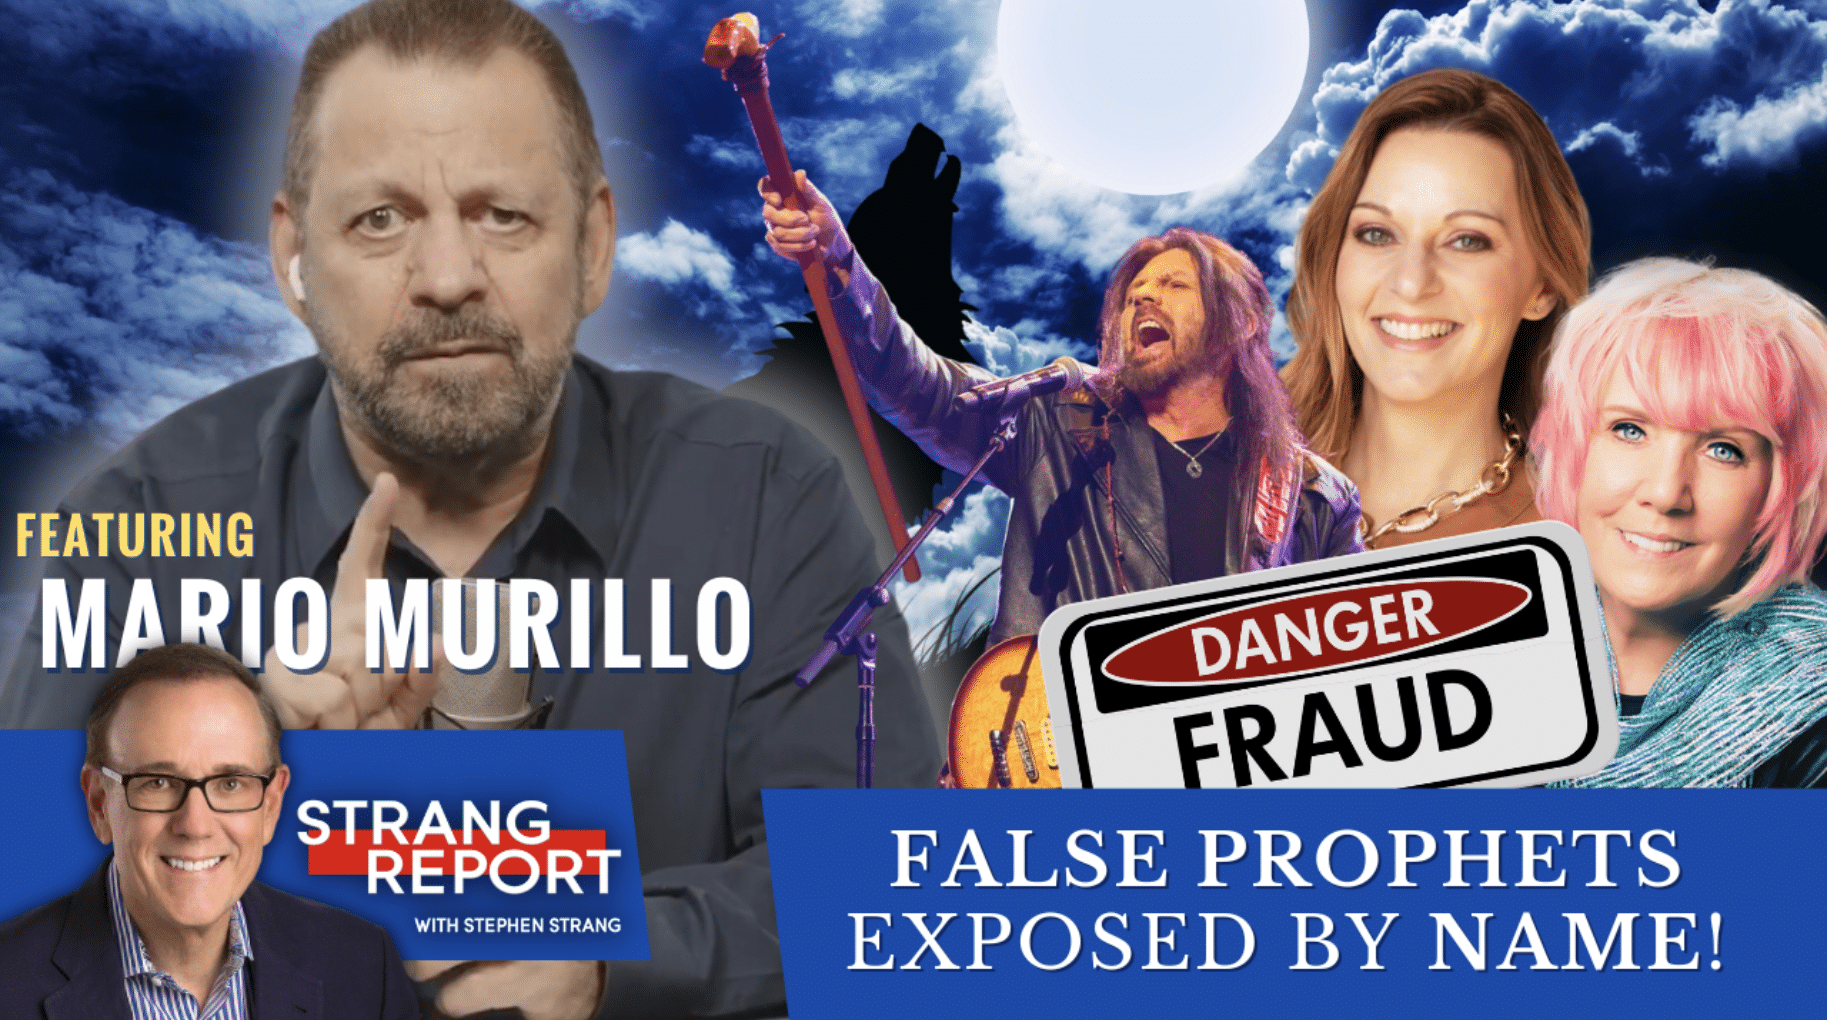 (WATCH) Mario Murillo urges “False Prophets” to Repent